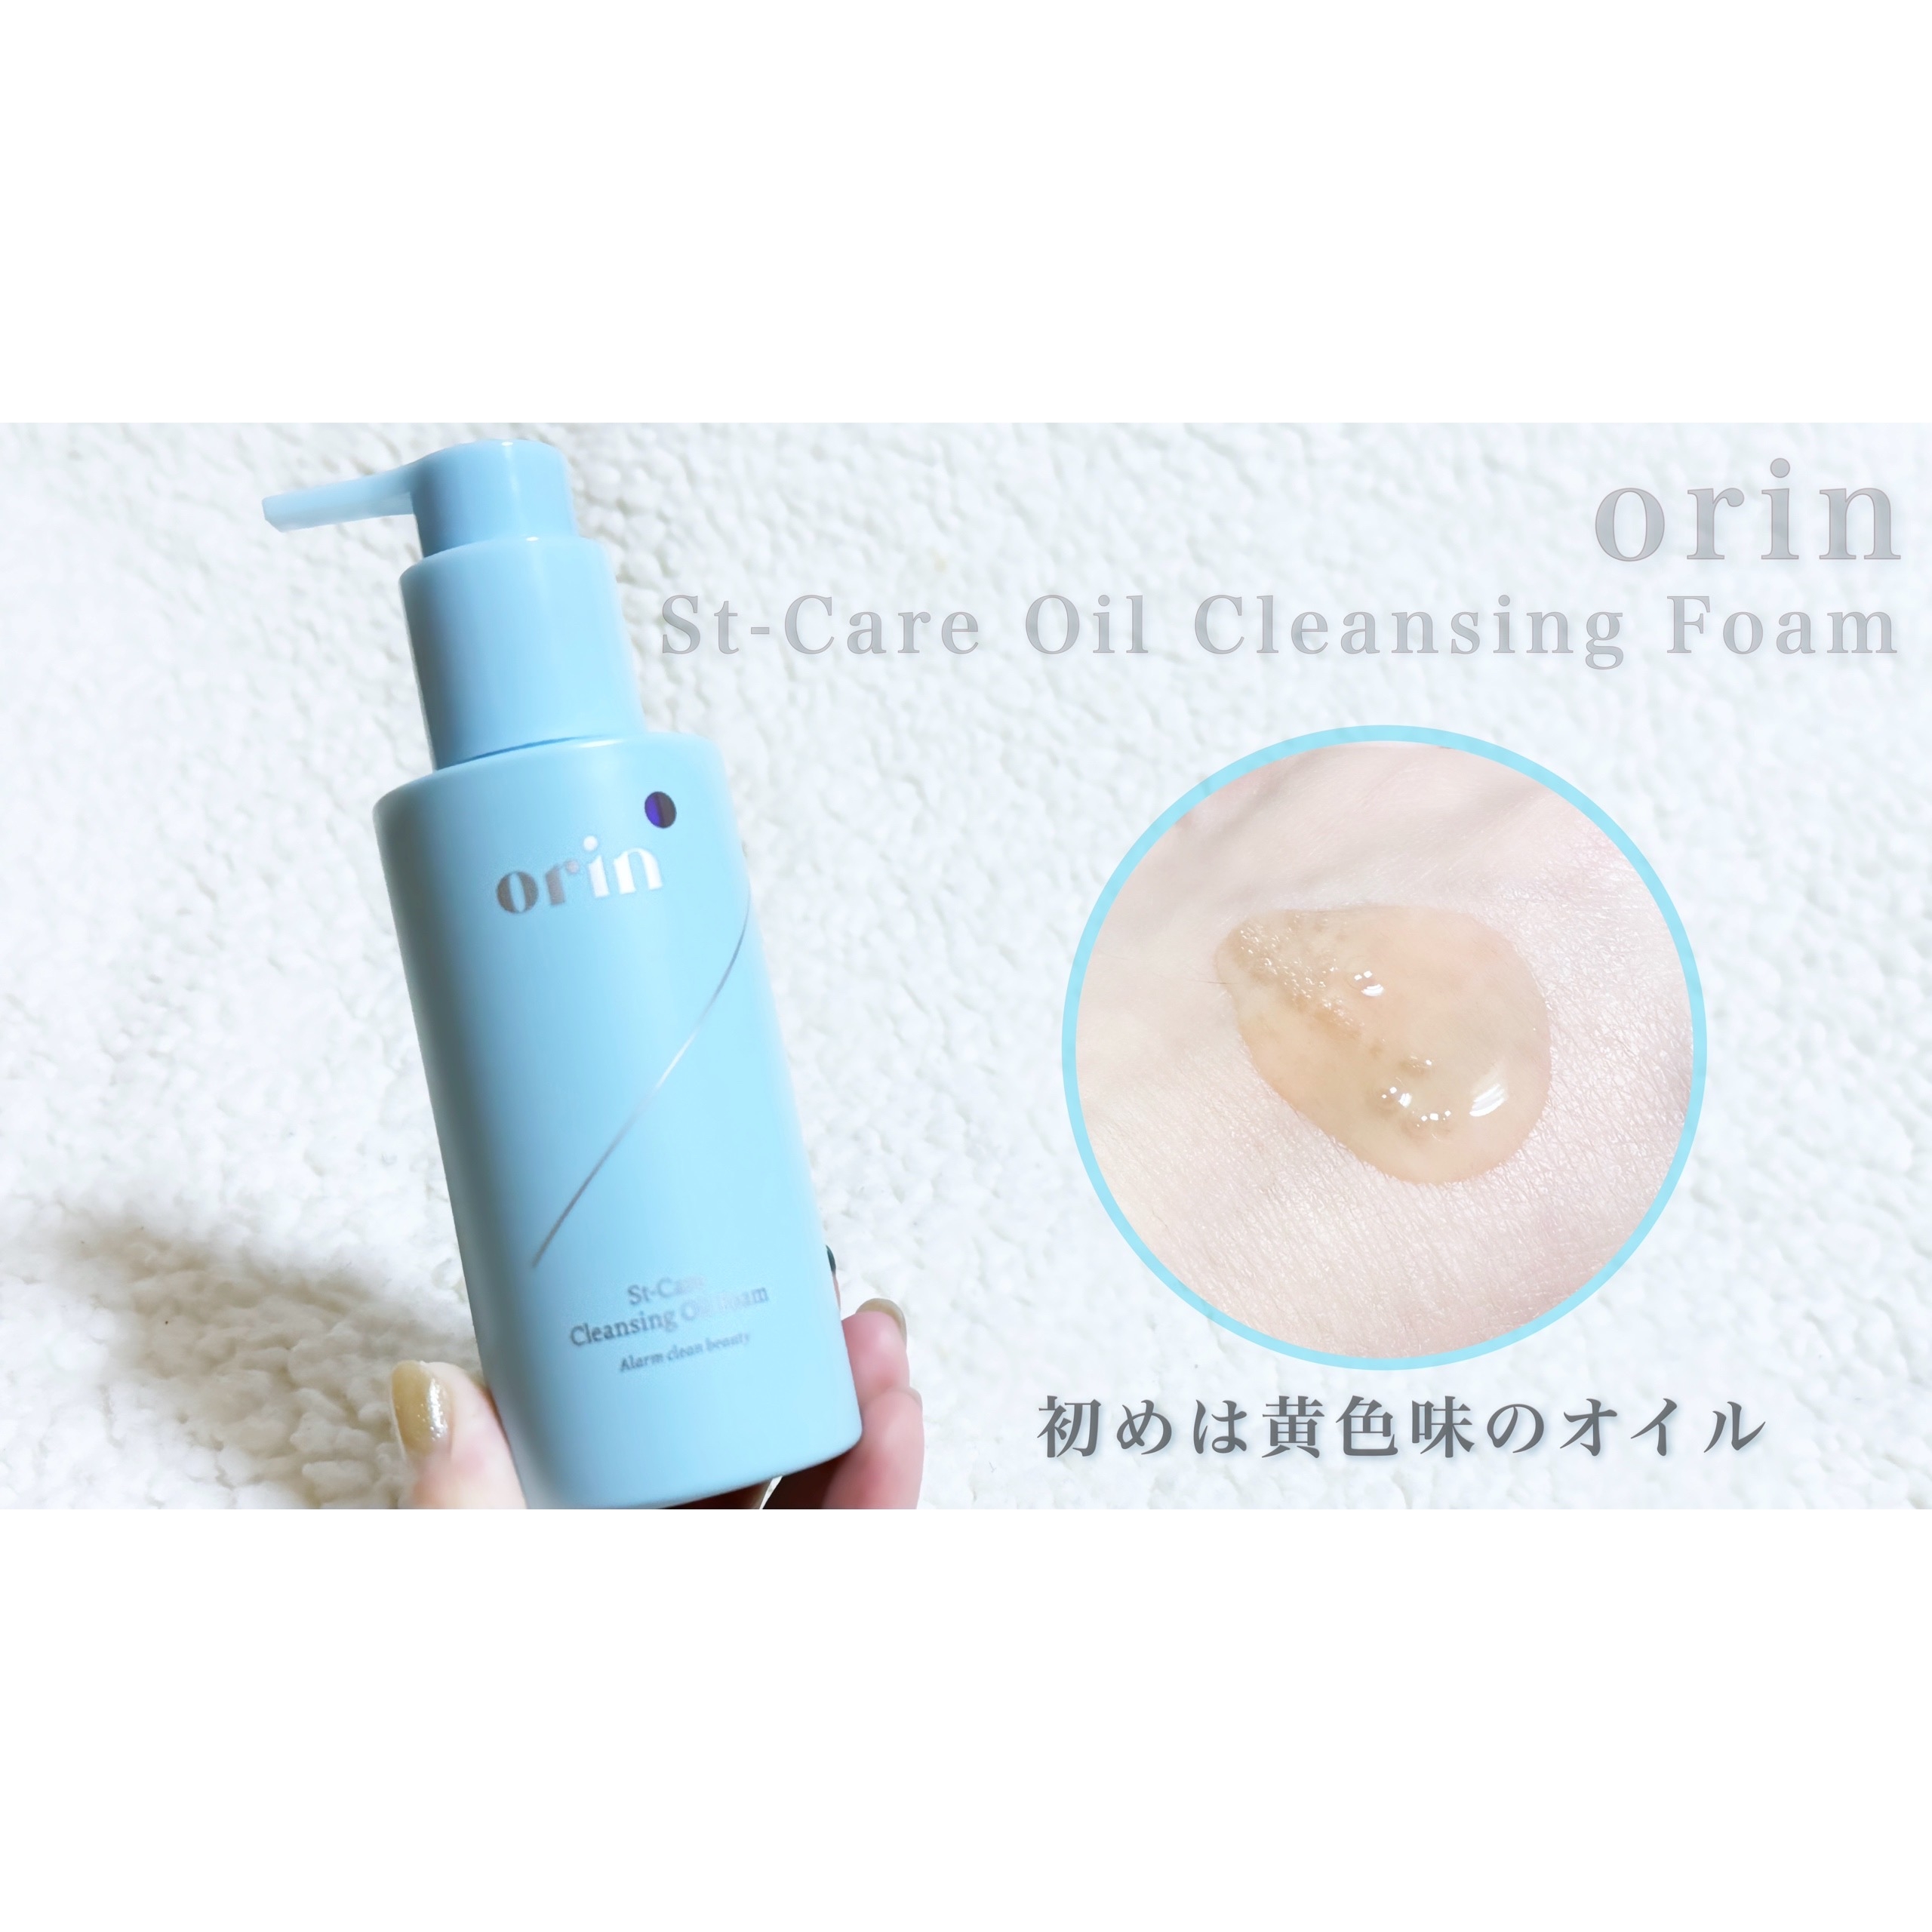 orinSt-Care Oil Cleansing Foamを使ったcosmemo2021さんのクチコミ画像2